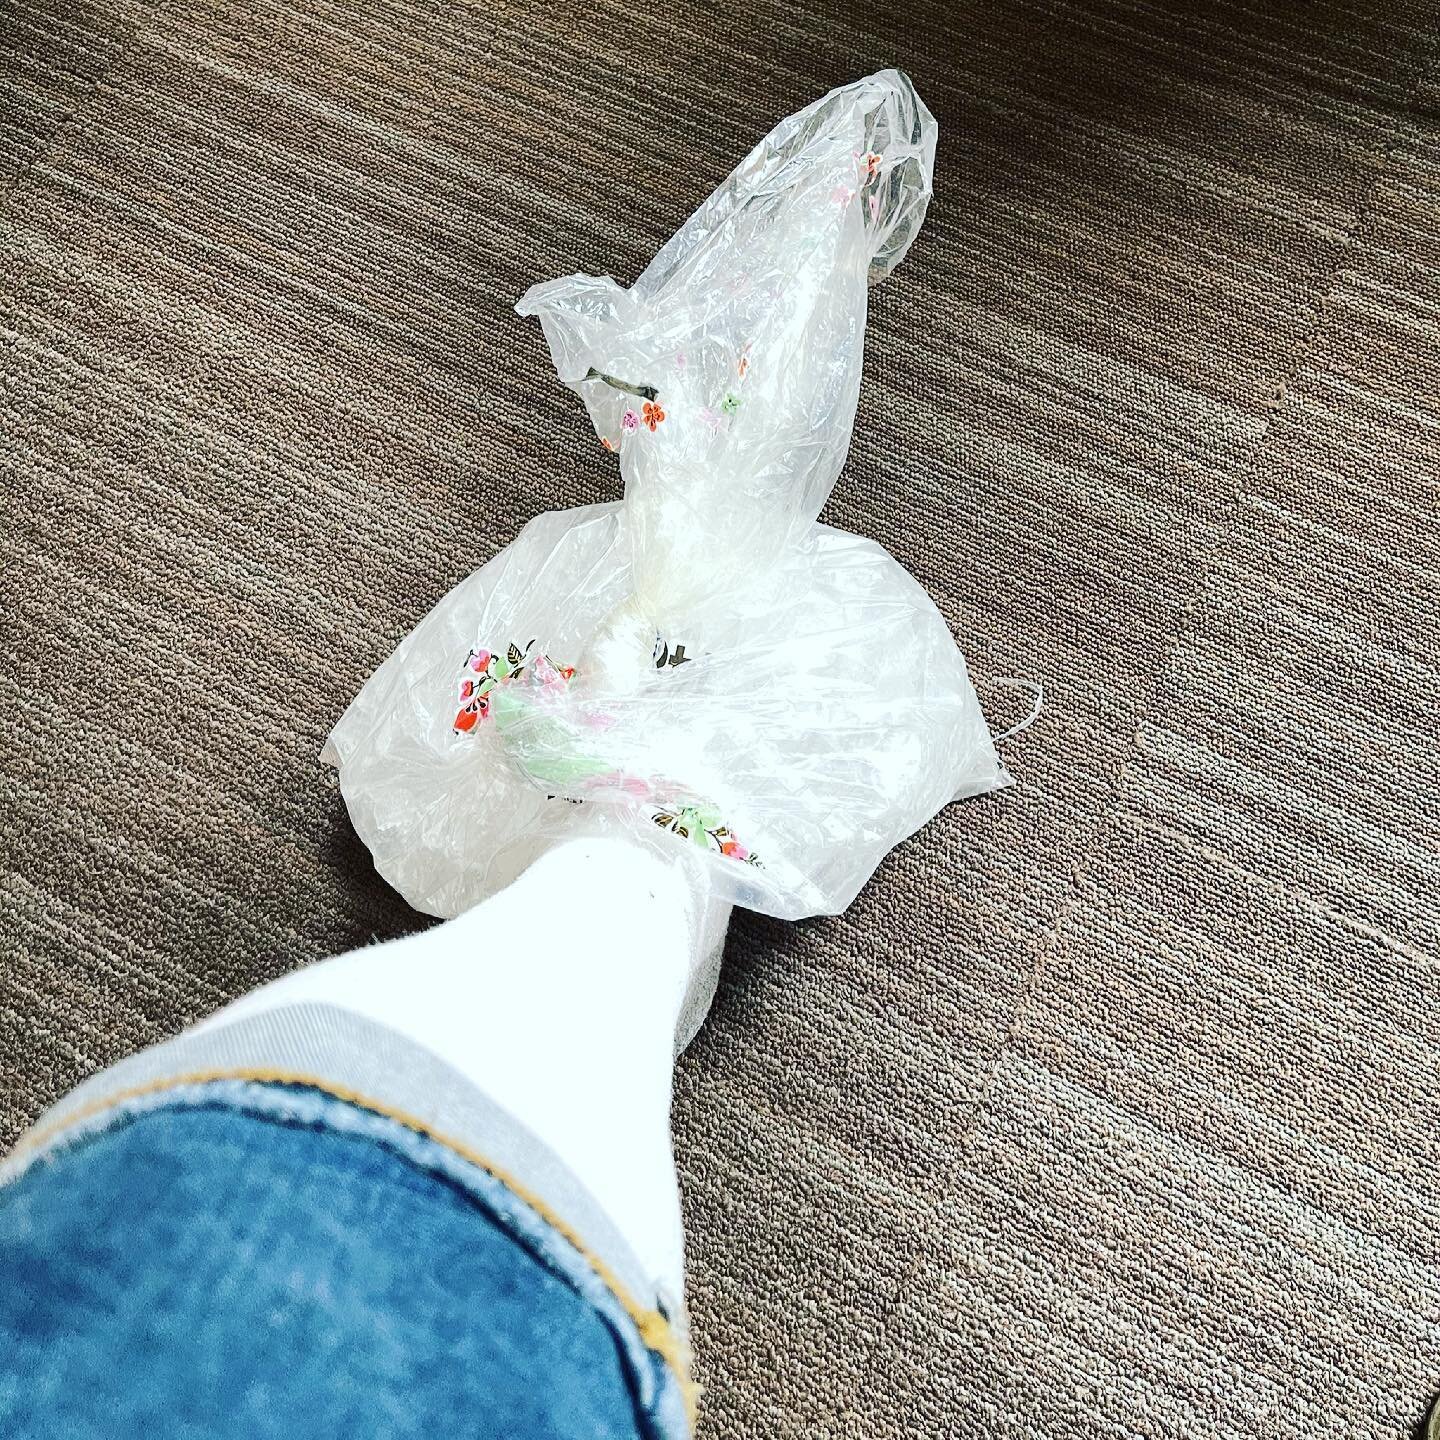 Icing my left foot at work, because it just randomly decided to give me level-ten pain all day and rob me of my ability to, like, walk and stuff. #thisis40